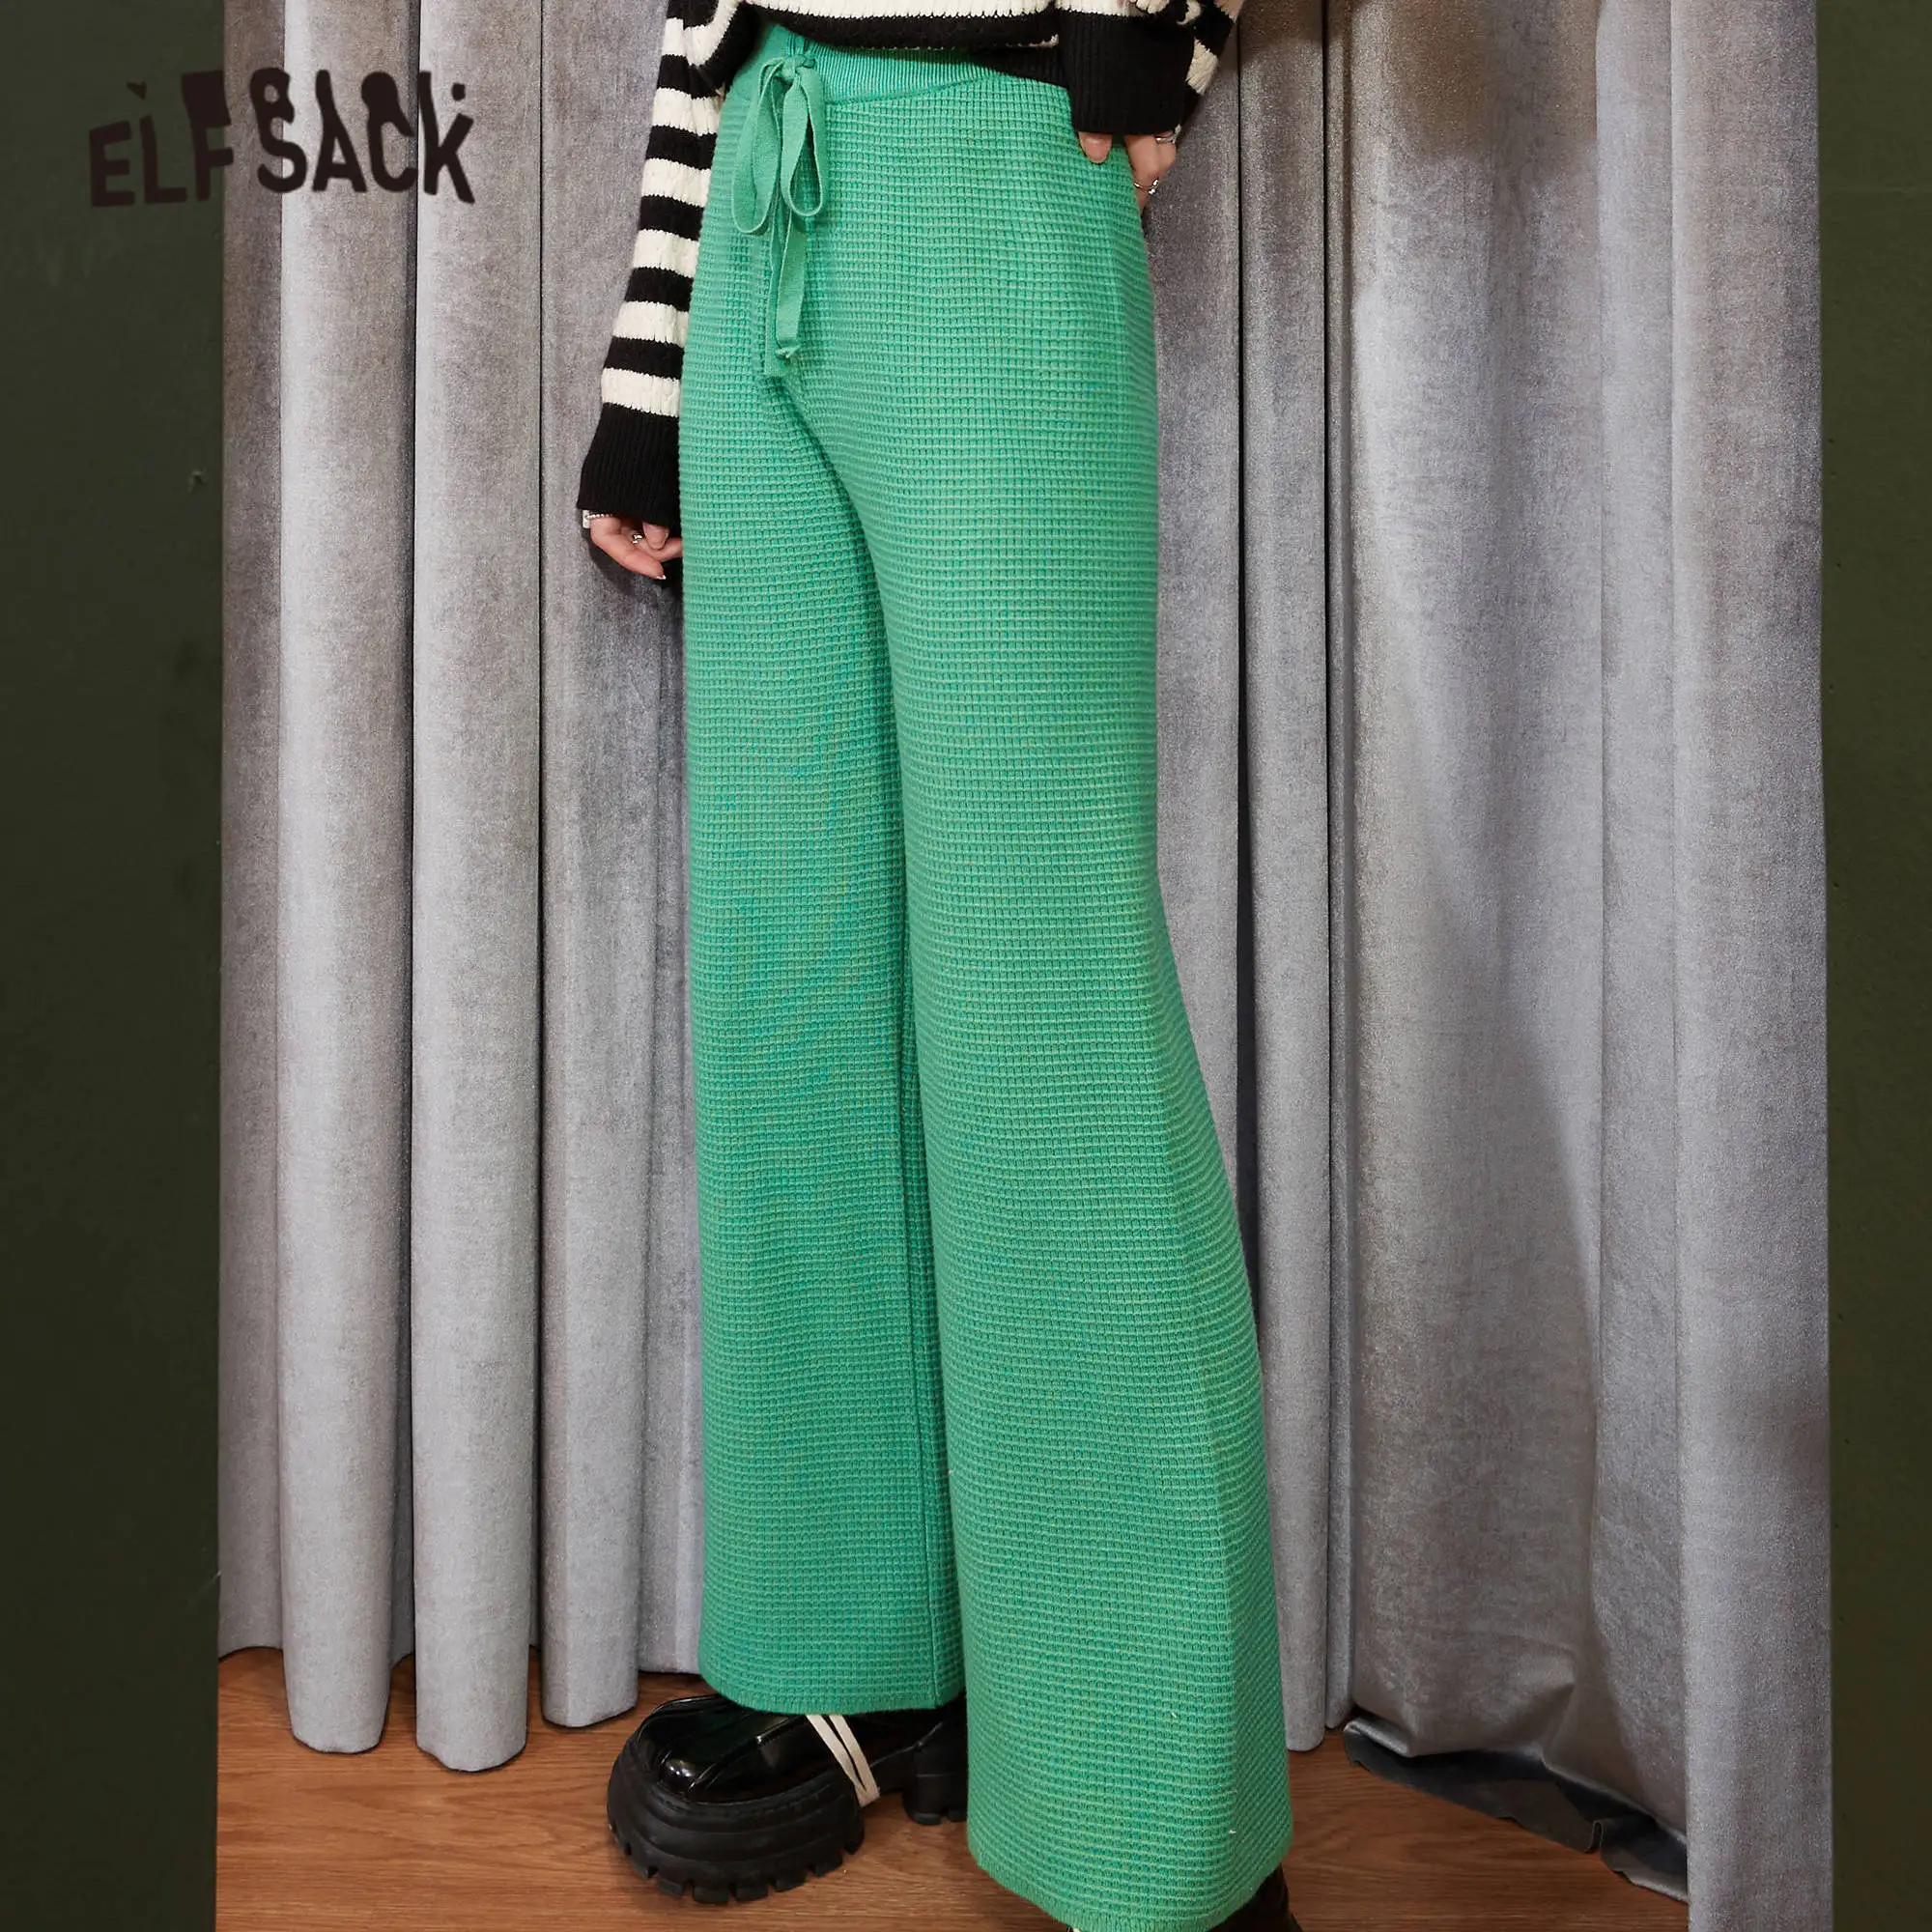 ELFSACK Solid Pure High Waist Straight Casual Women Knitted Pants,2021 Winter Vintage,Korean Ladies Basic Daily Wide Leg Trouser